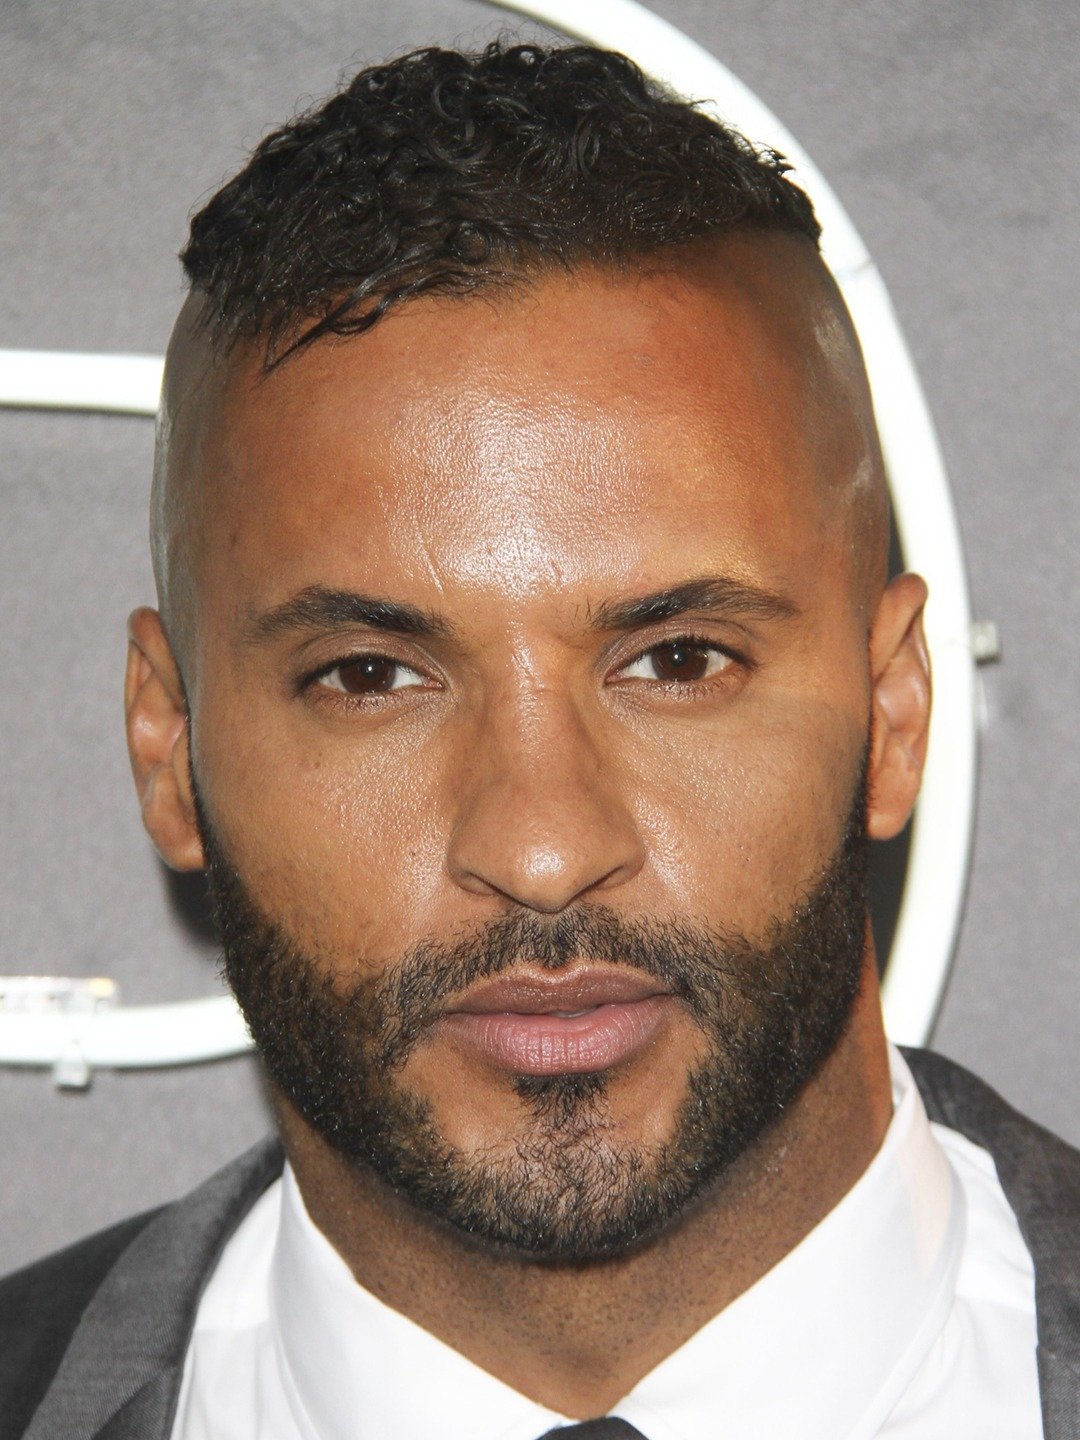 How tall is Ricky Whittle?